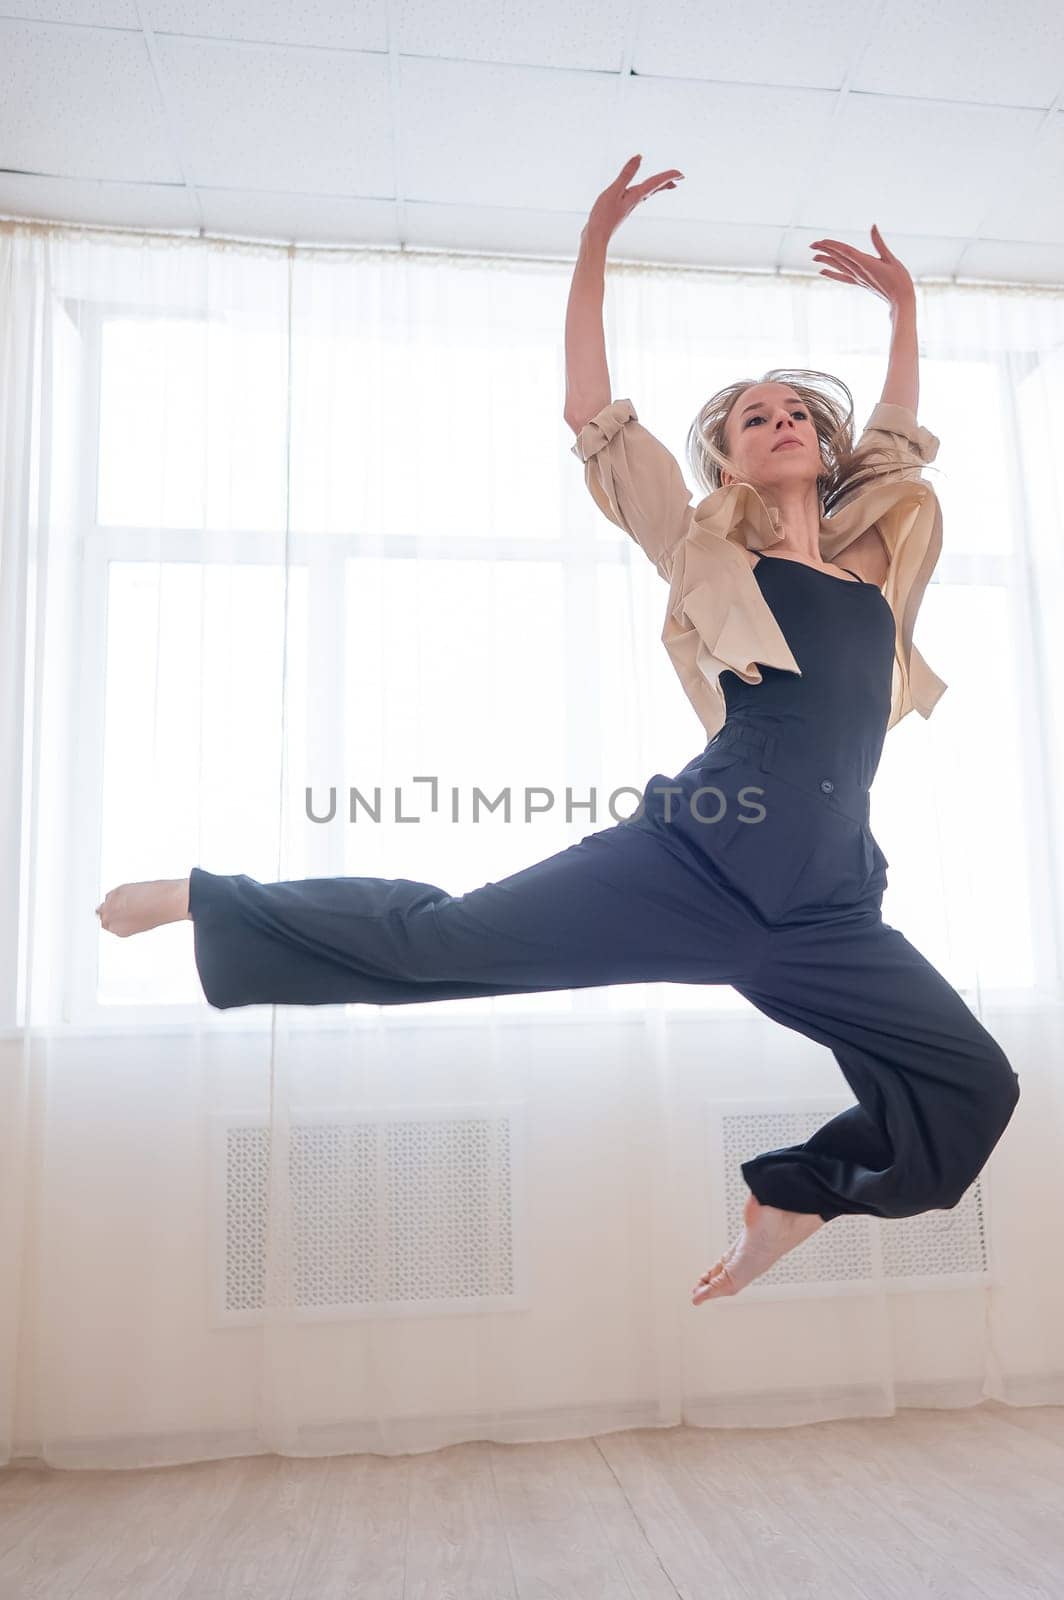 Caucasian woman dances contemporary in ballet class. Dancer in a jump. Vertical photo. by mrwed54